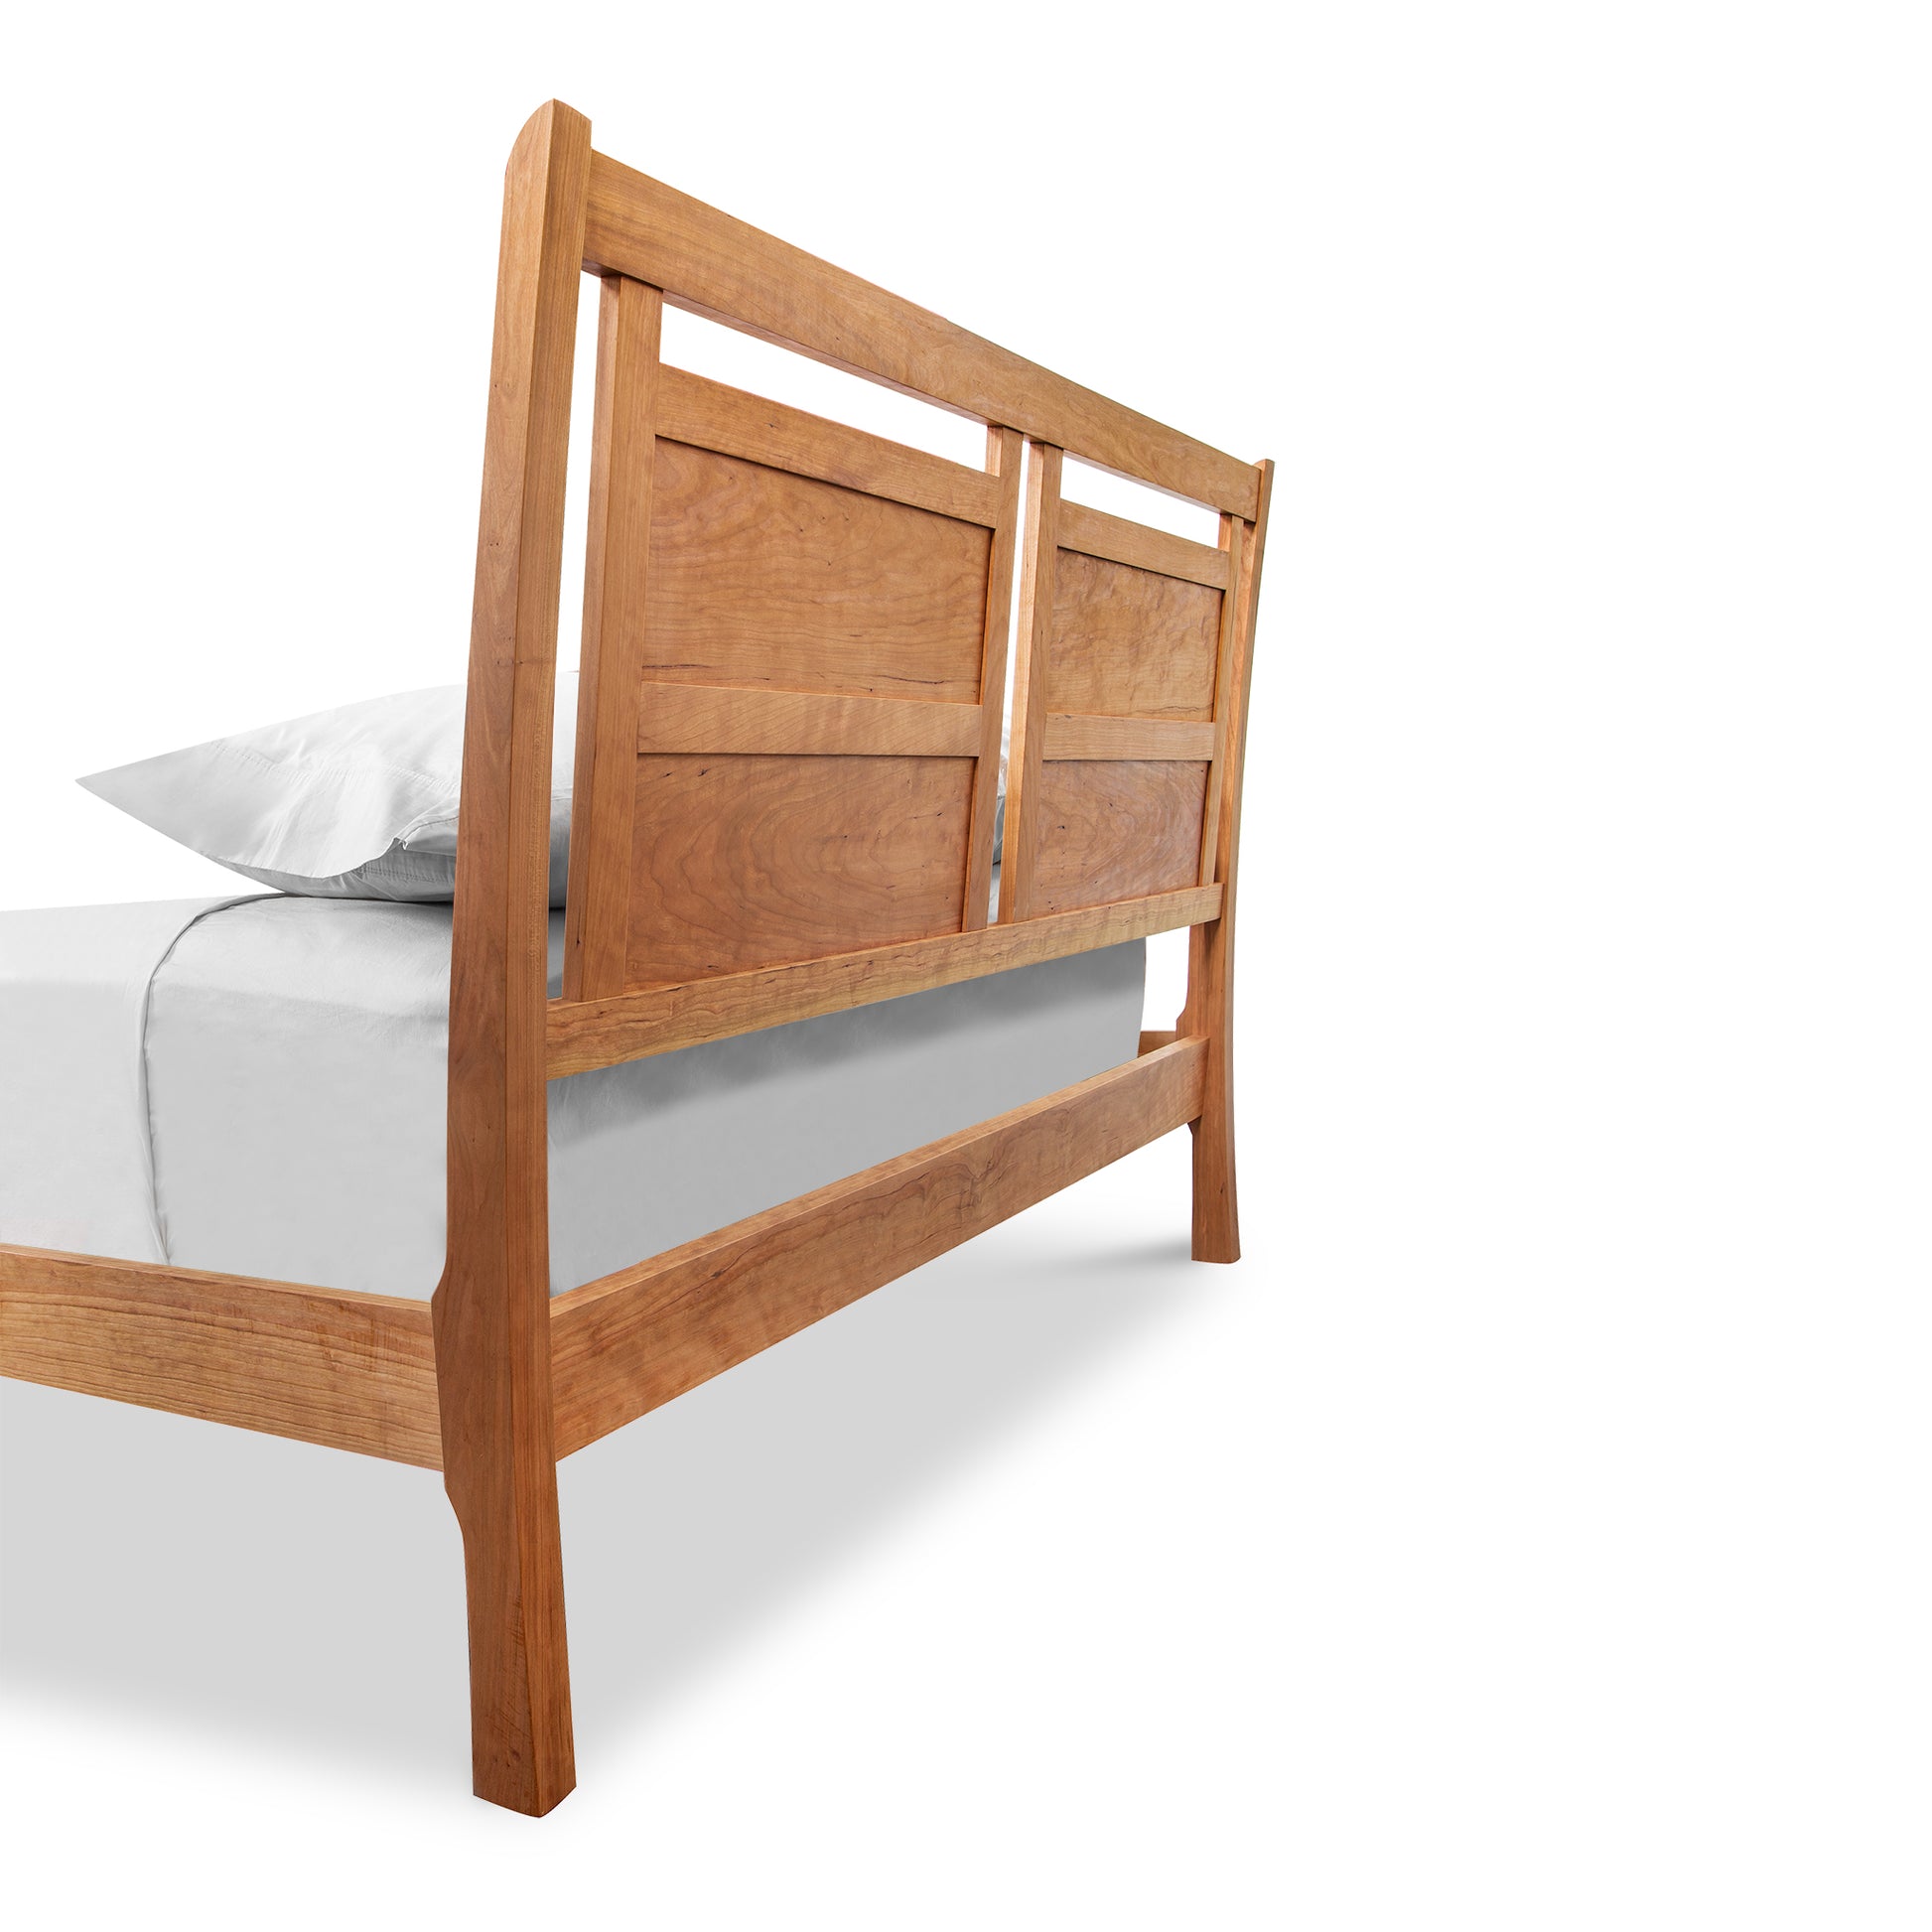 Handcrafted Vermont Furniture Designs Incline Sleigh Bed with a headboard, partially dressed with a fitted sheet and a single pillow, against a white background.